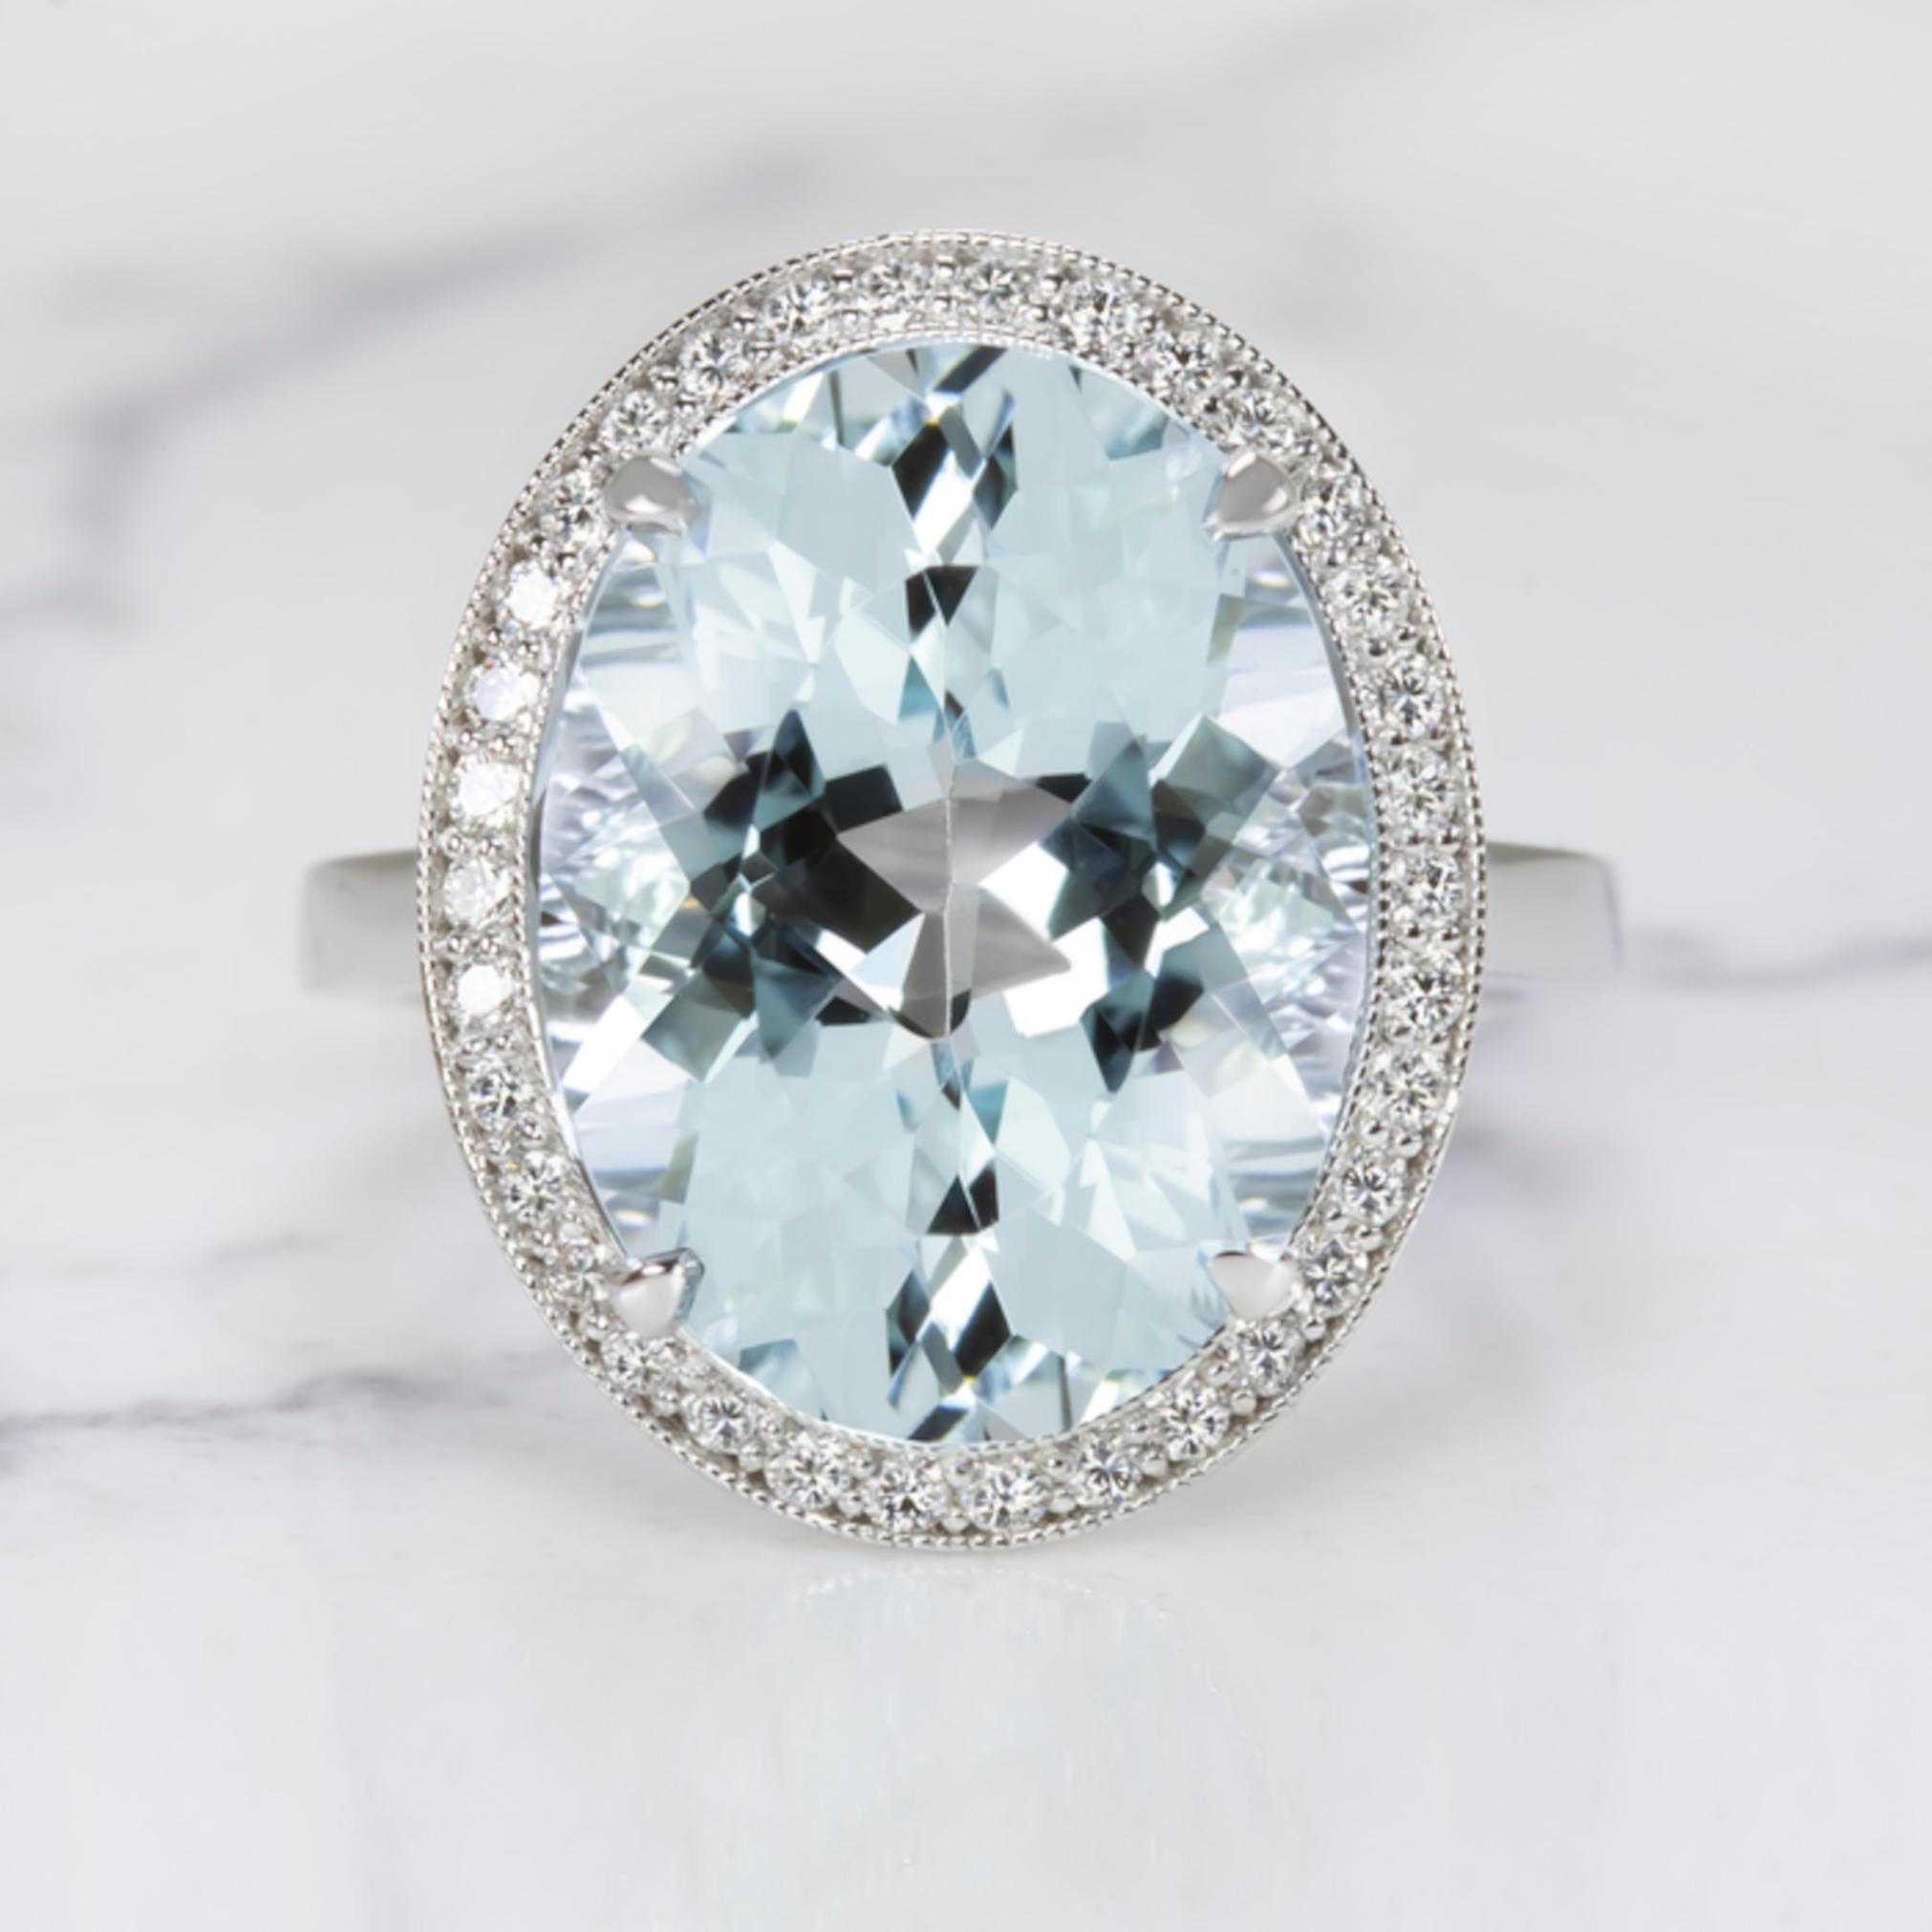 An incredible 8.81 carat natural aquamarine surrounded by a halo of glittering accent diamonds. With its substantial size and gorgeous sky blue hue, the aquamarine has an absolutely stunning presence! 

The effect is luxurious and truly eye catching